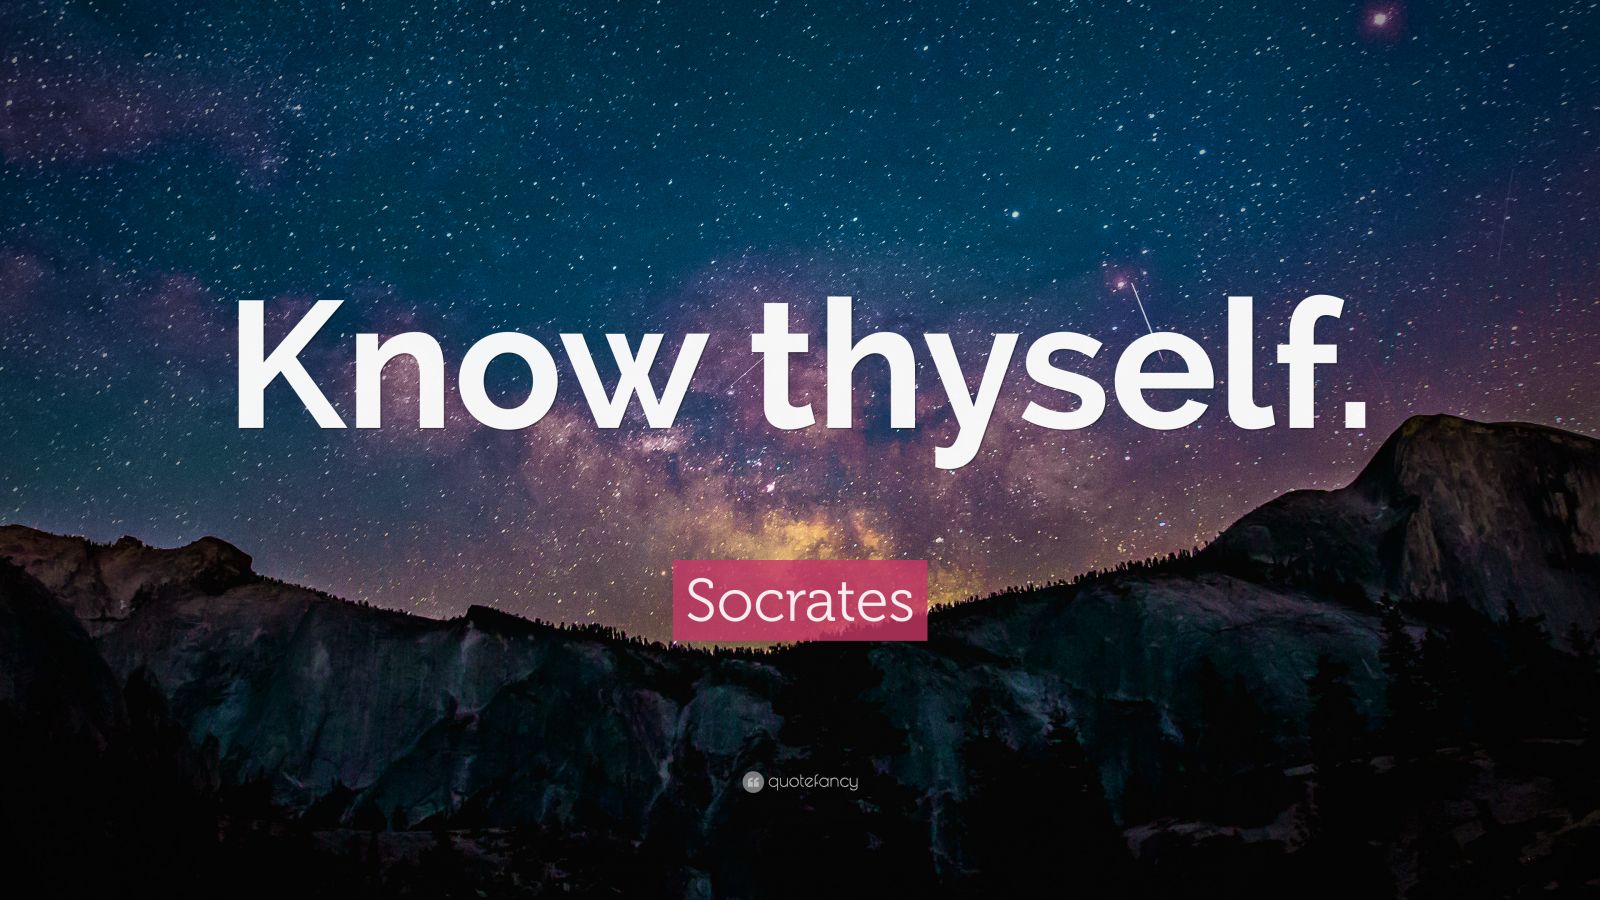 Socrates Quote: “Know thyself.” (32 wallpapers) - Quotefancy